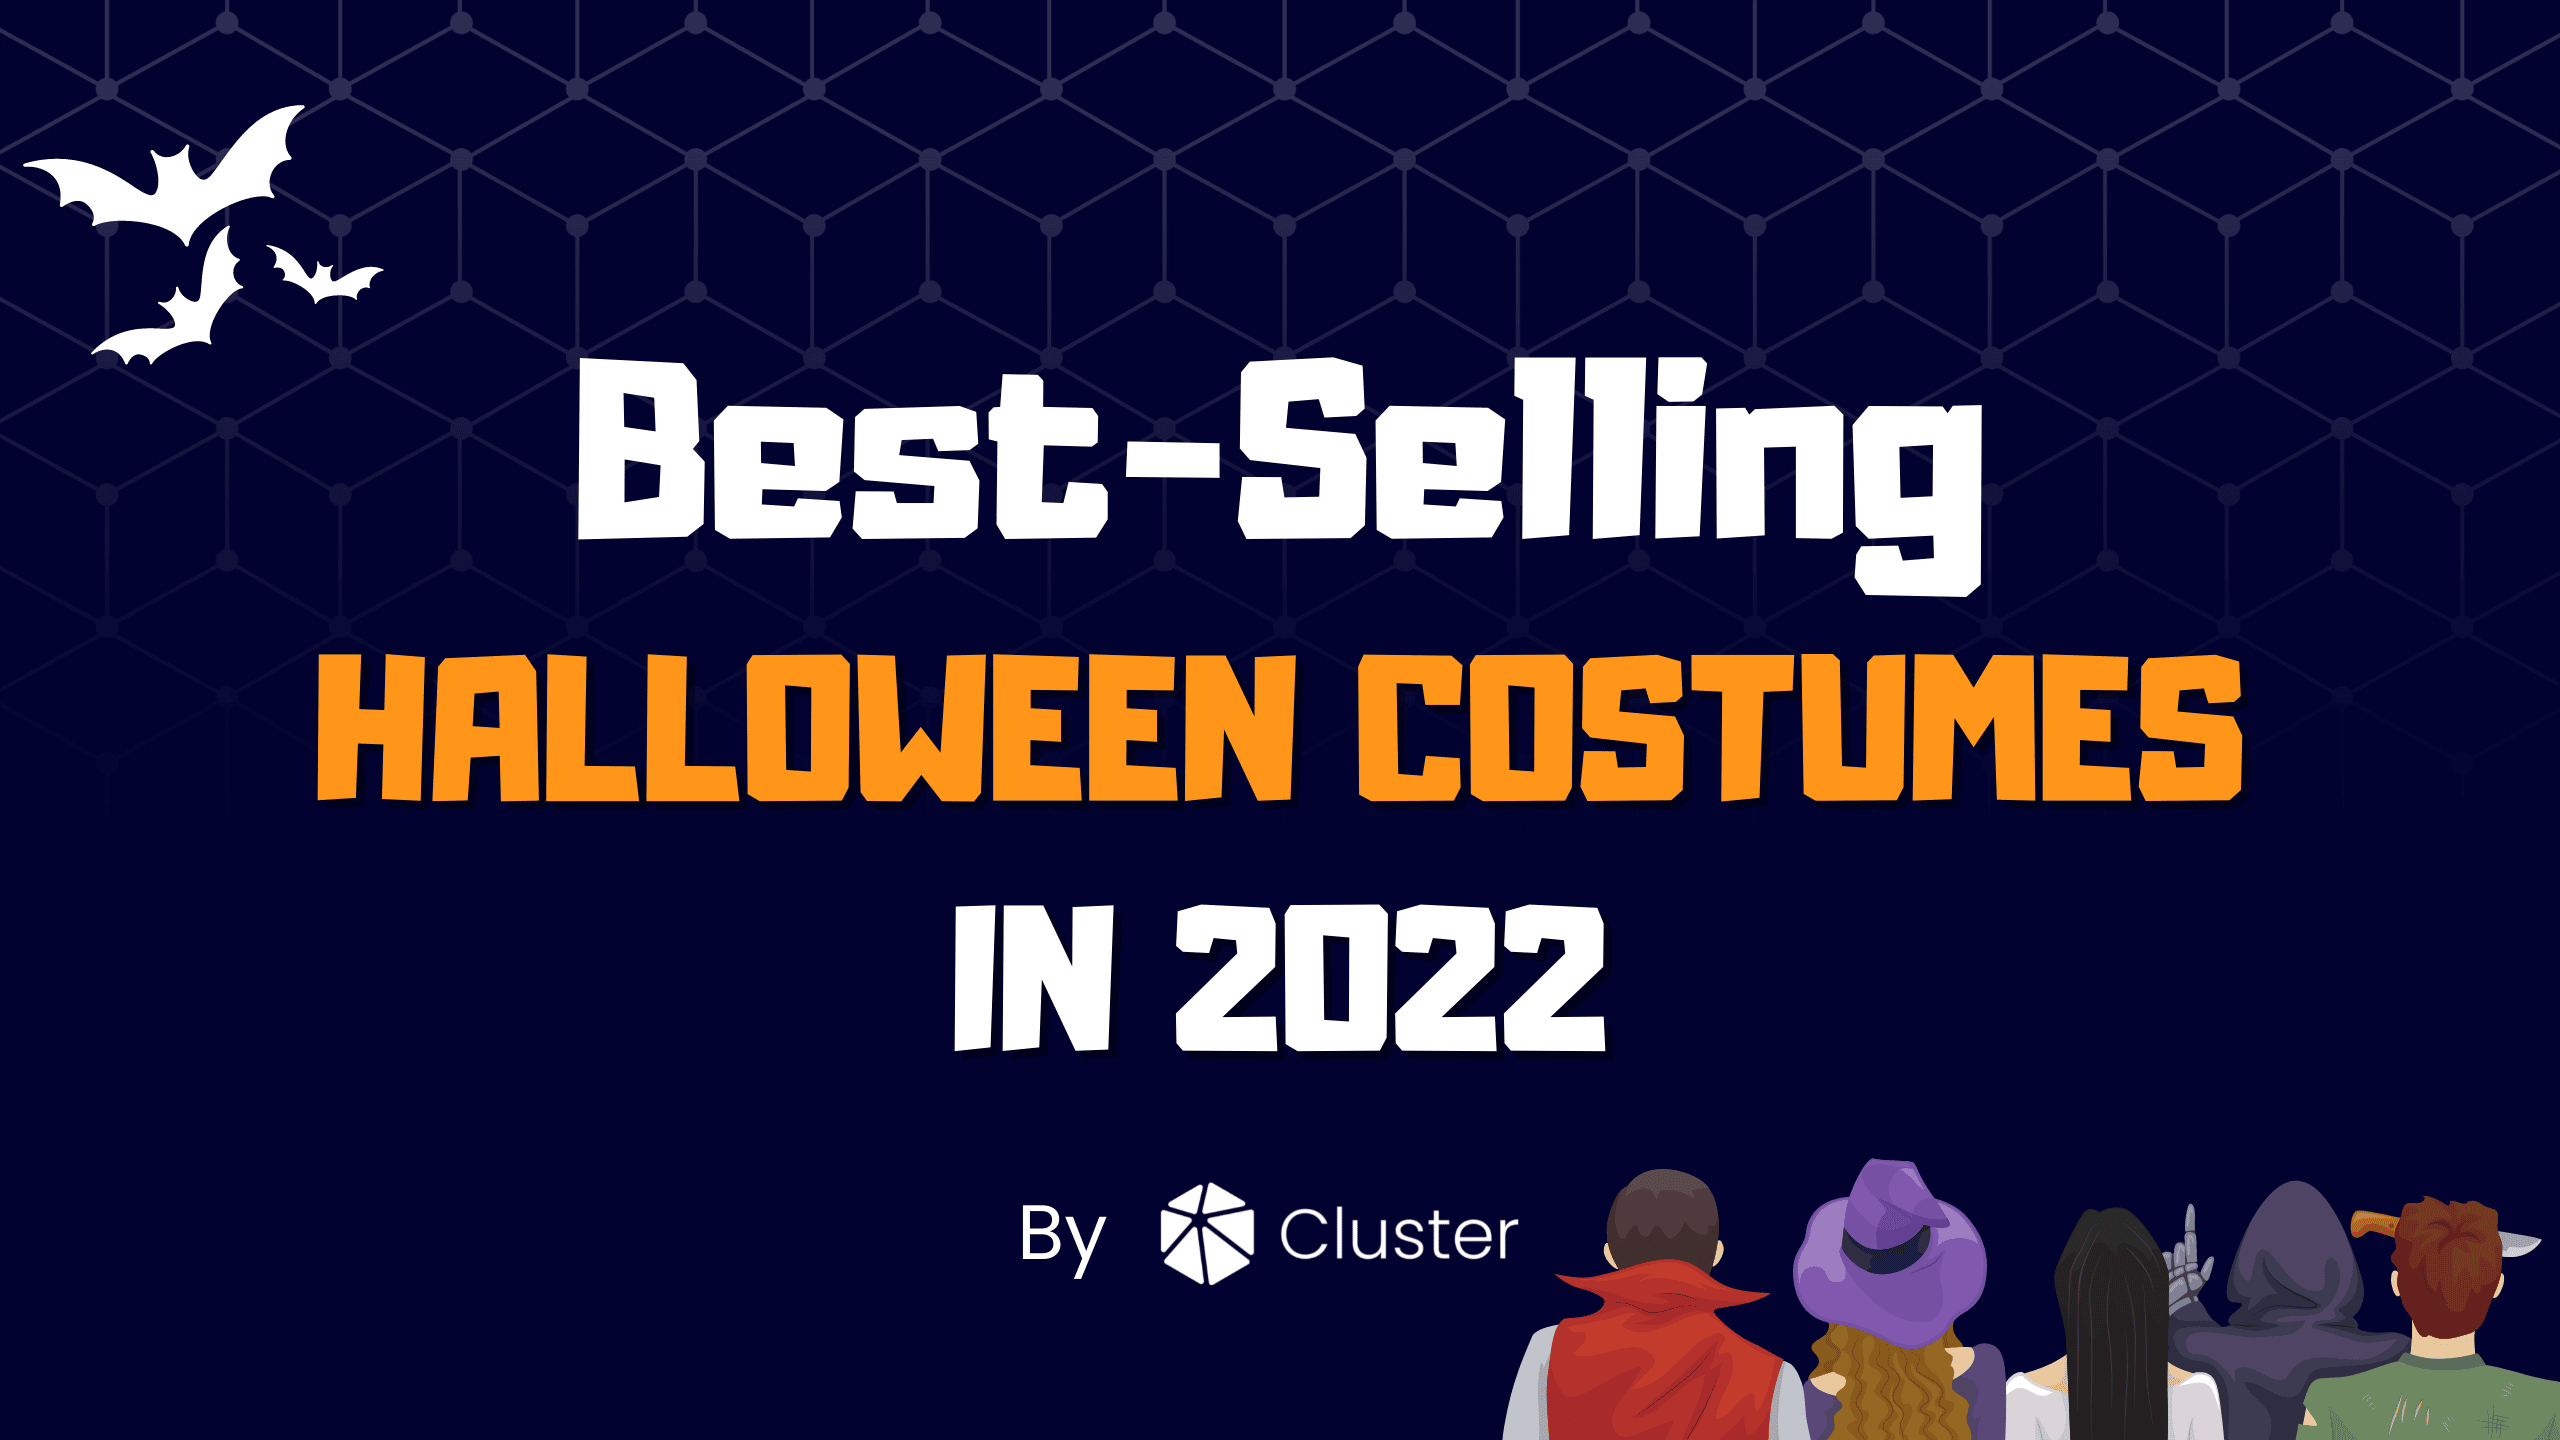 Best-Selling Halloween Costumes in 2022 by Cluster